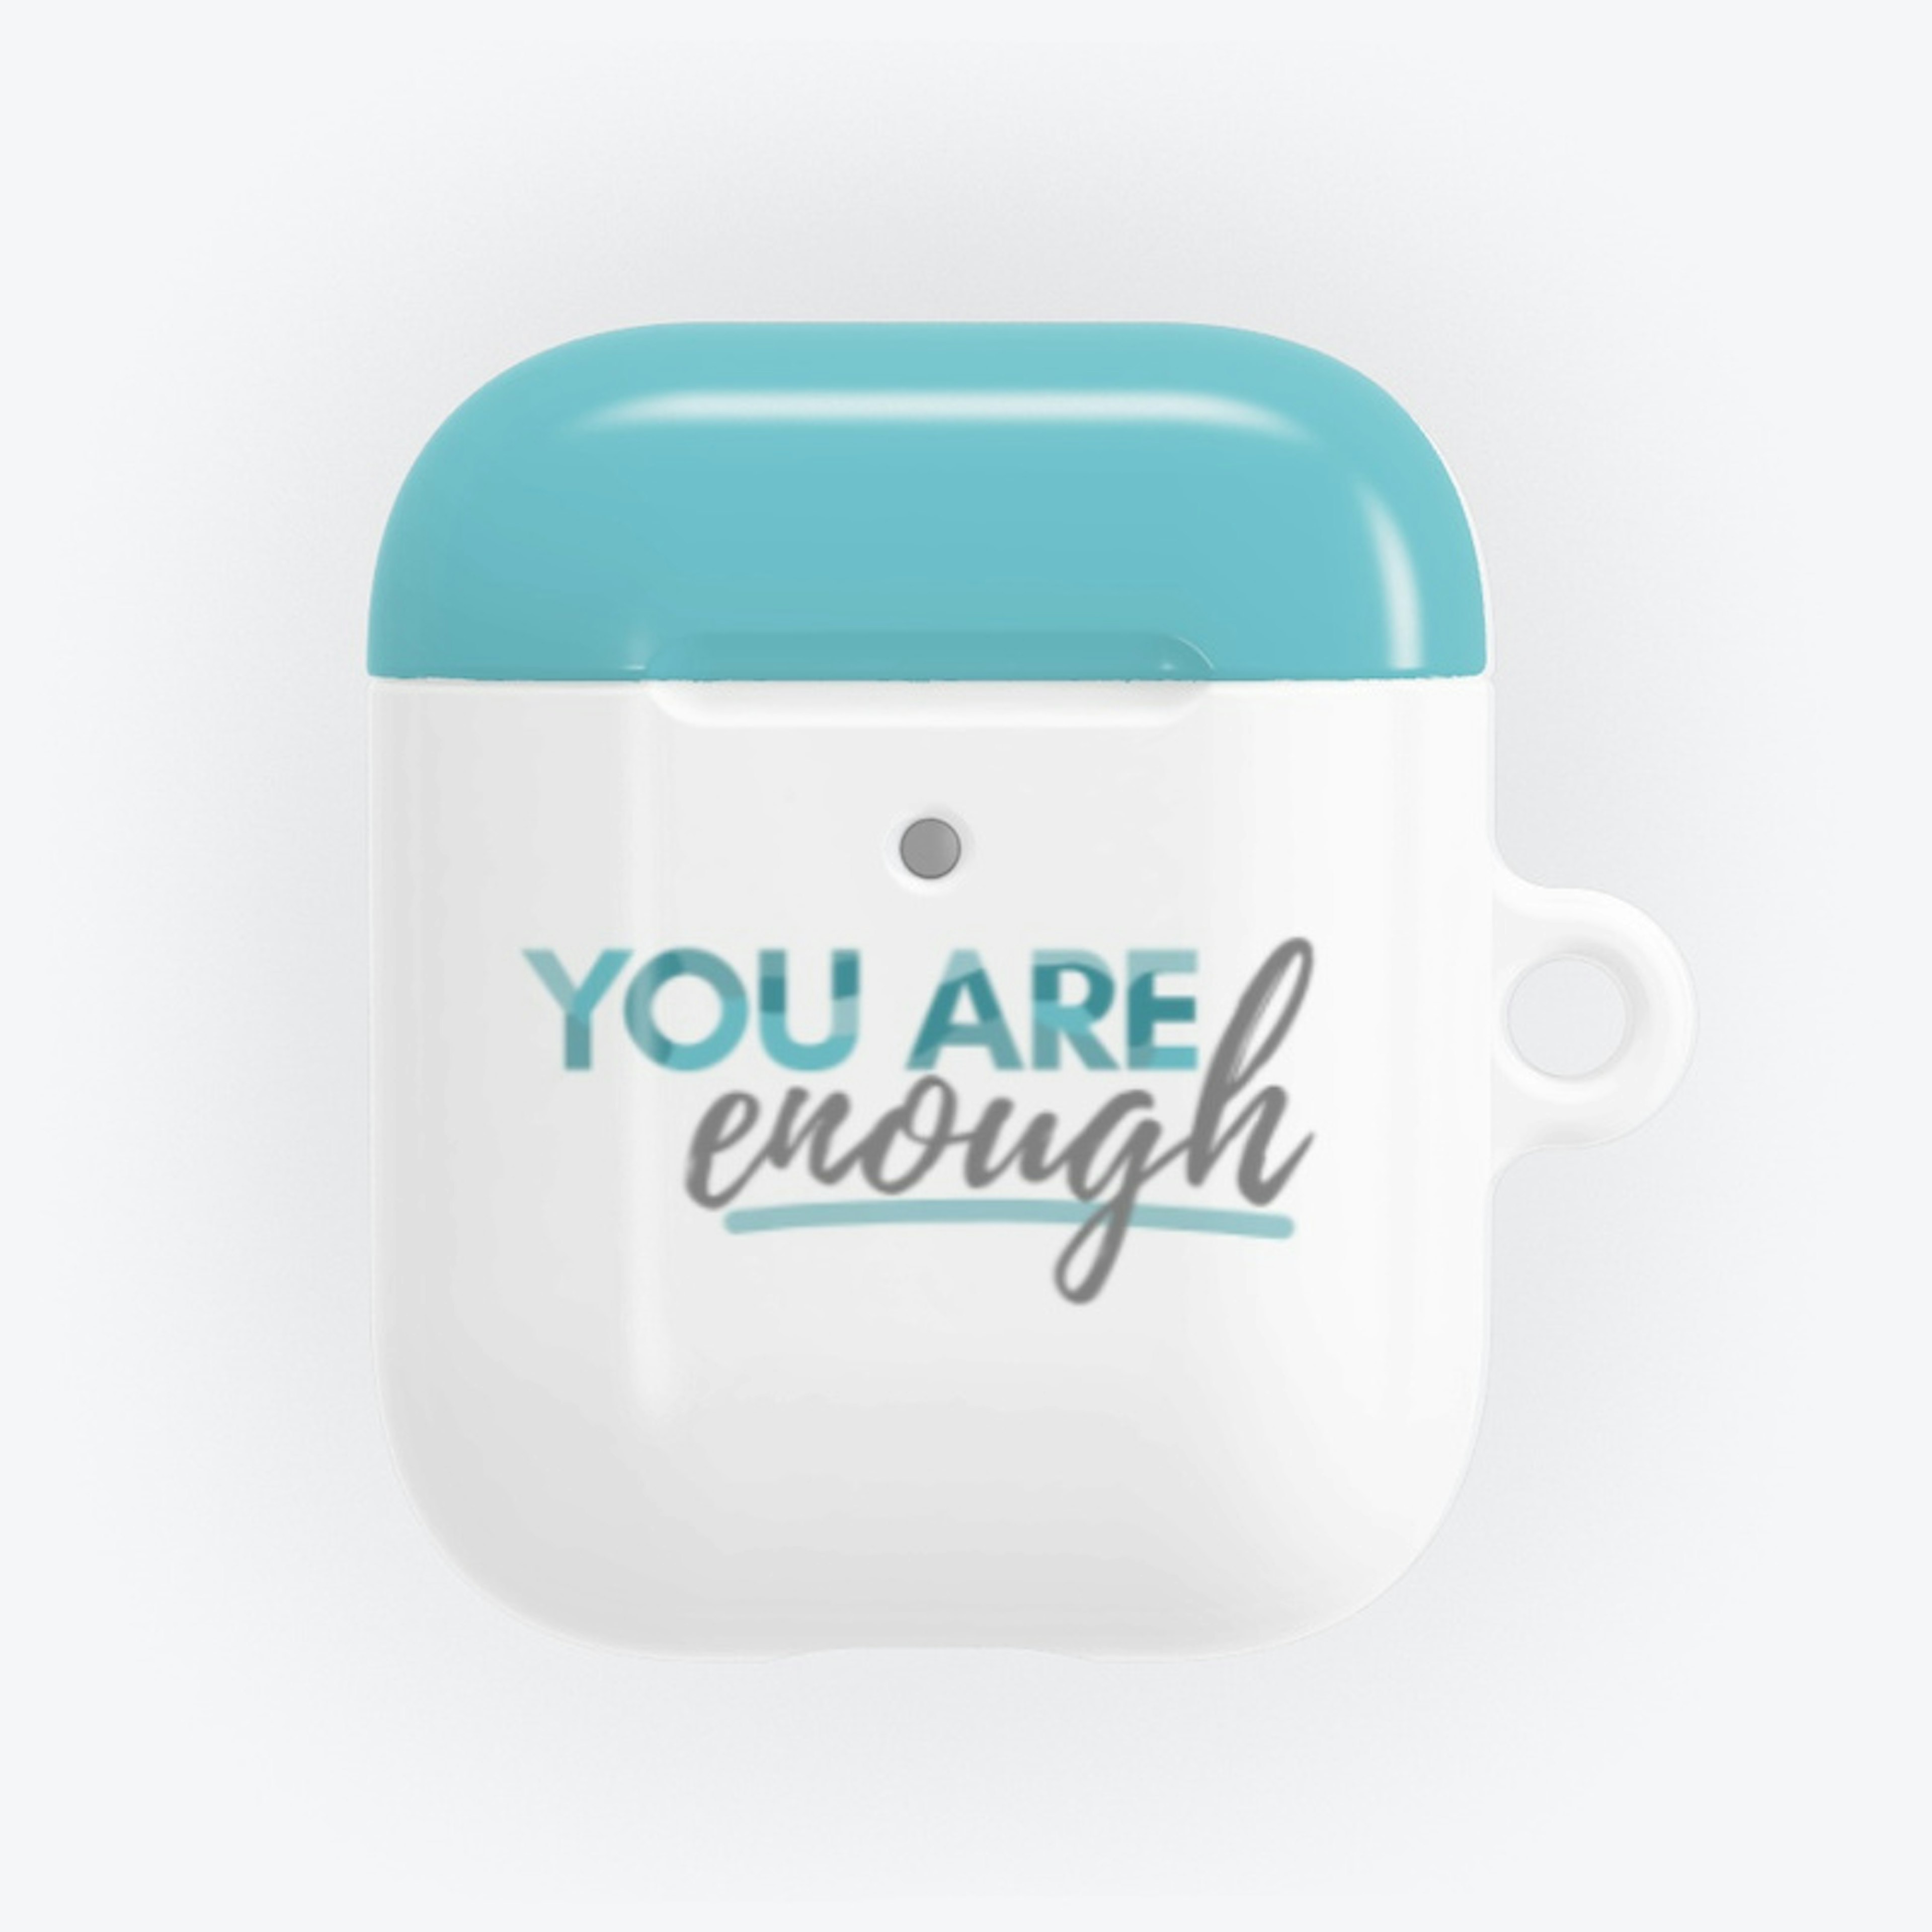 You Are Enough AirPods Case